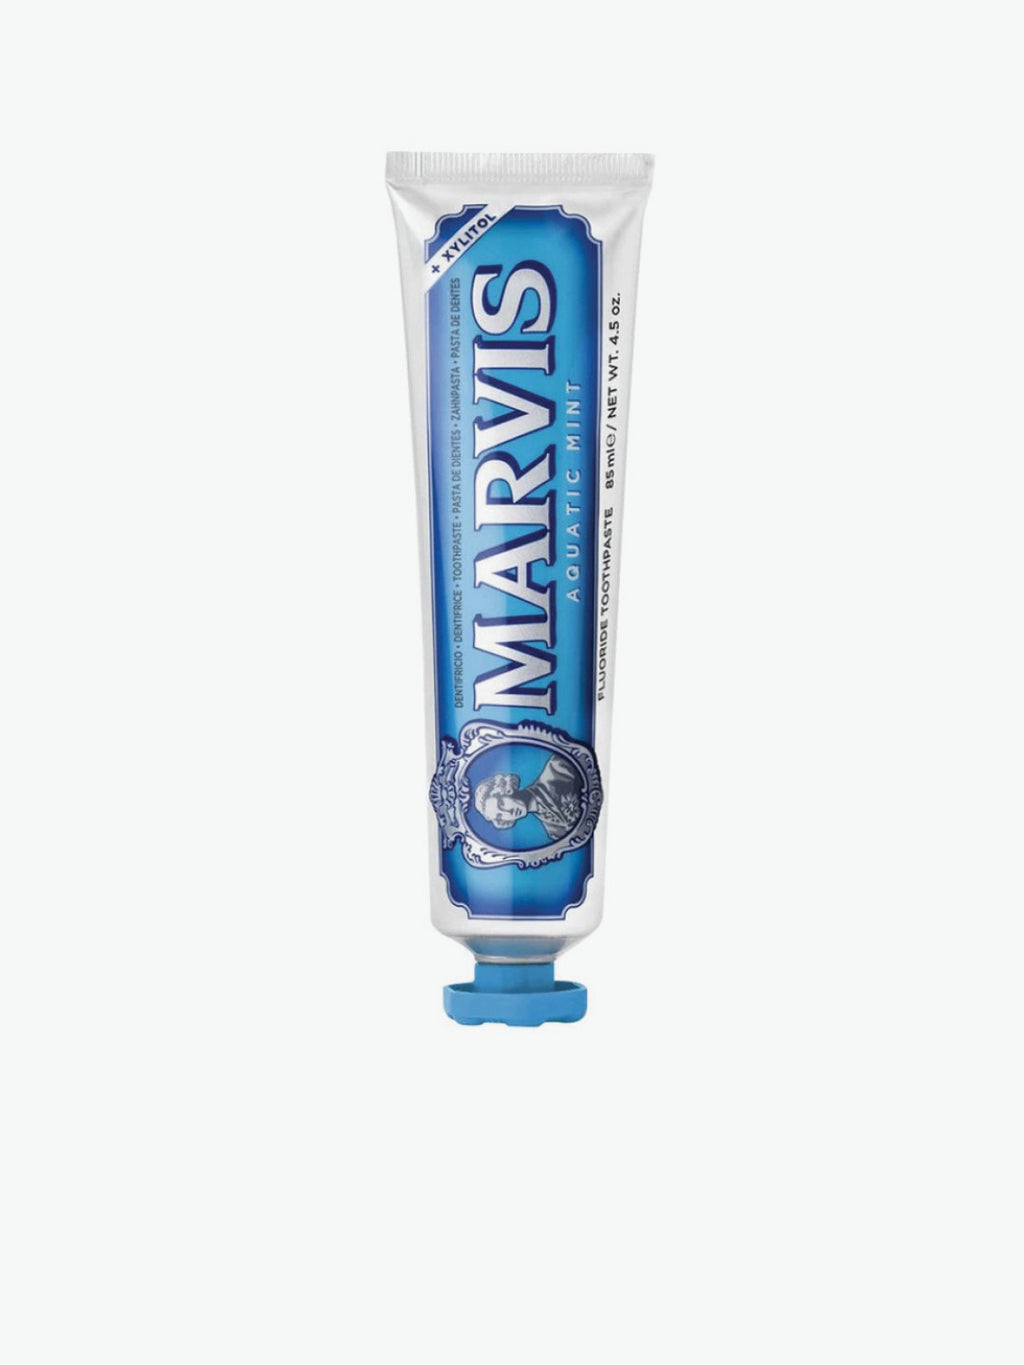 Marvis Aquatic Mint Toothpaste 85ml + Xylitol | A